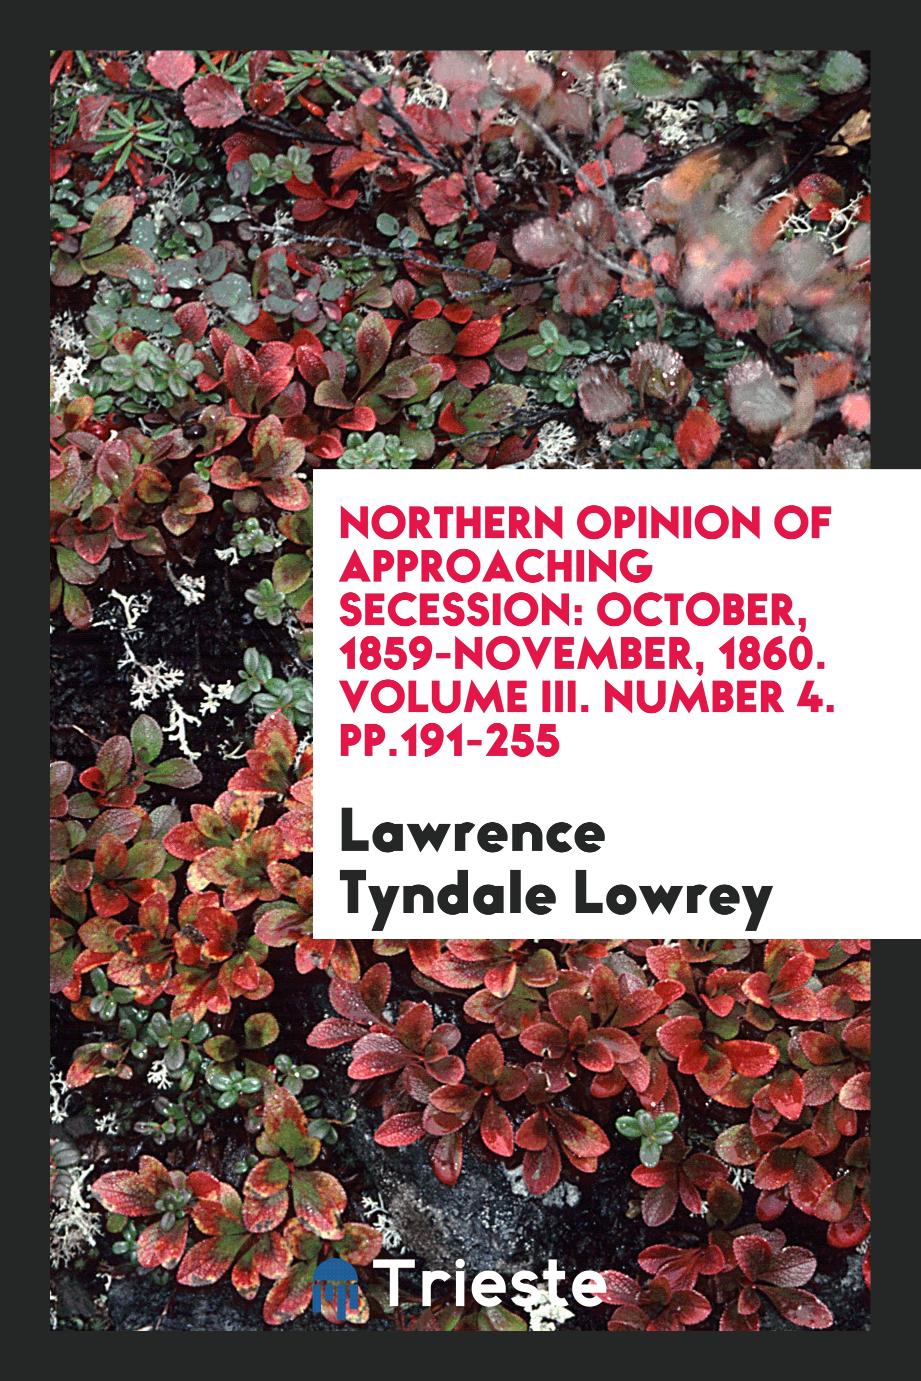 Northern Opinion of Approaching Secession: October, 1859-November, 1860. Volume III. Number 4. pp.191-255